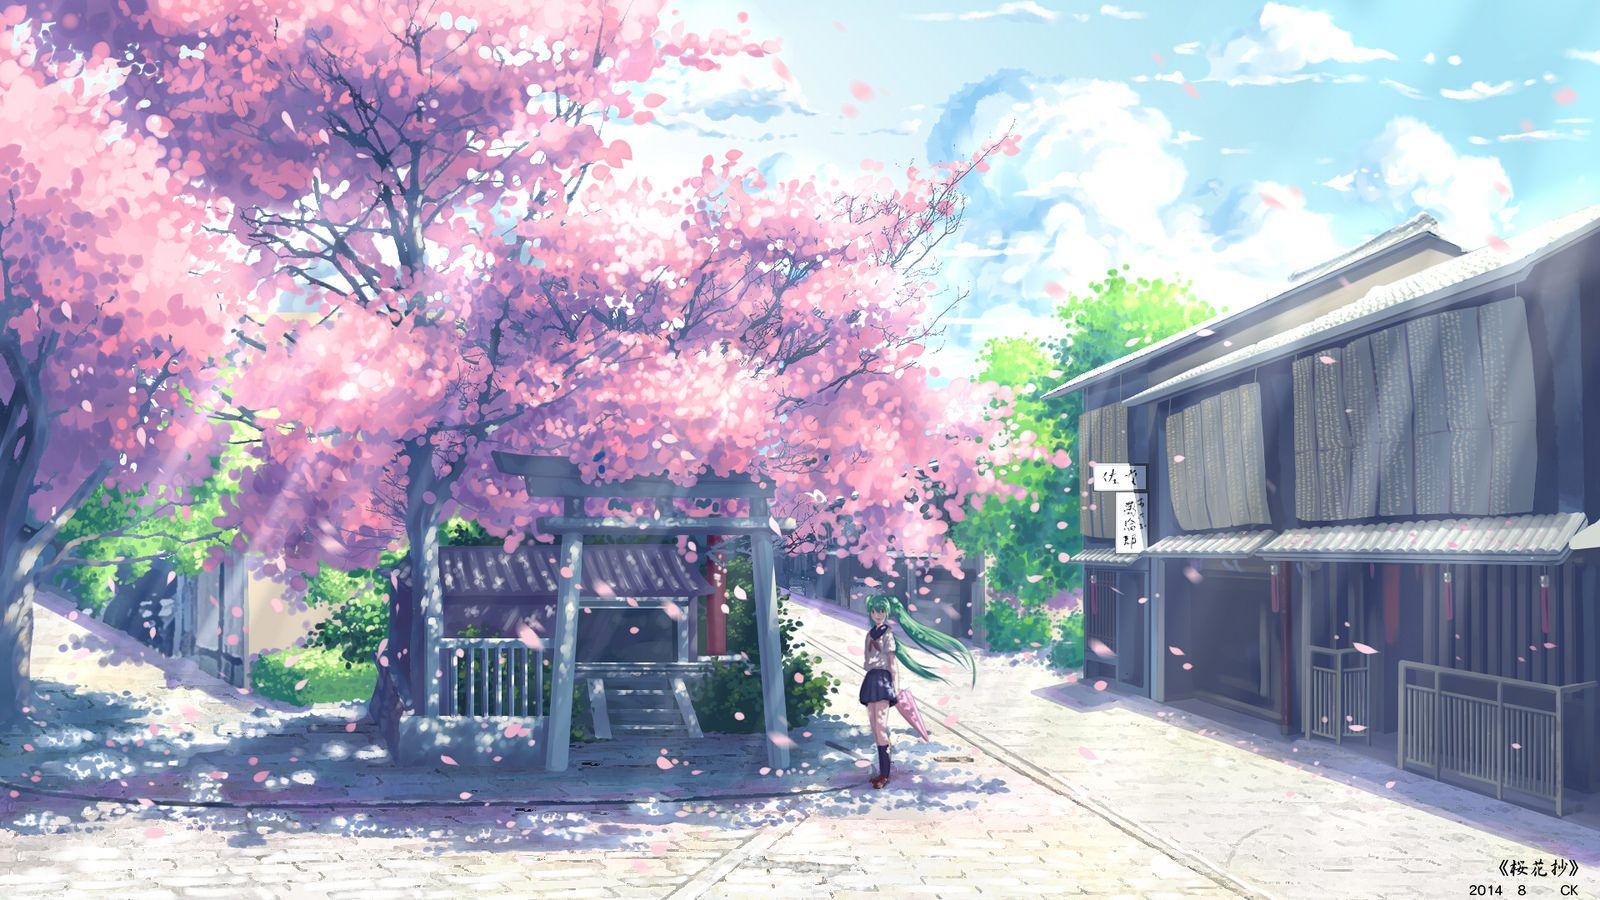 Anime Scenery Cherry Blossoms Background Hd Image 1_28214060692_o. Anime Background Wallpaper, Anime Scenery, Anime Cherry Blossom